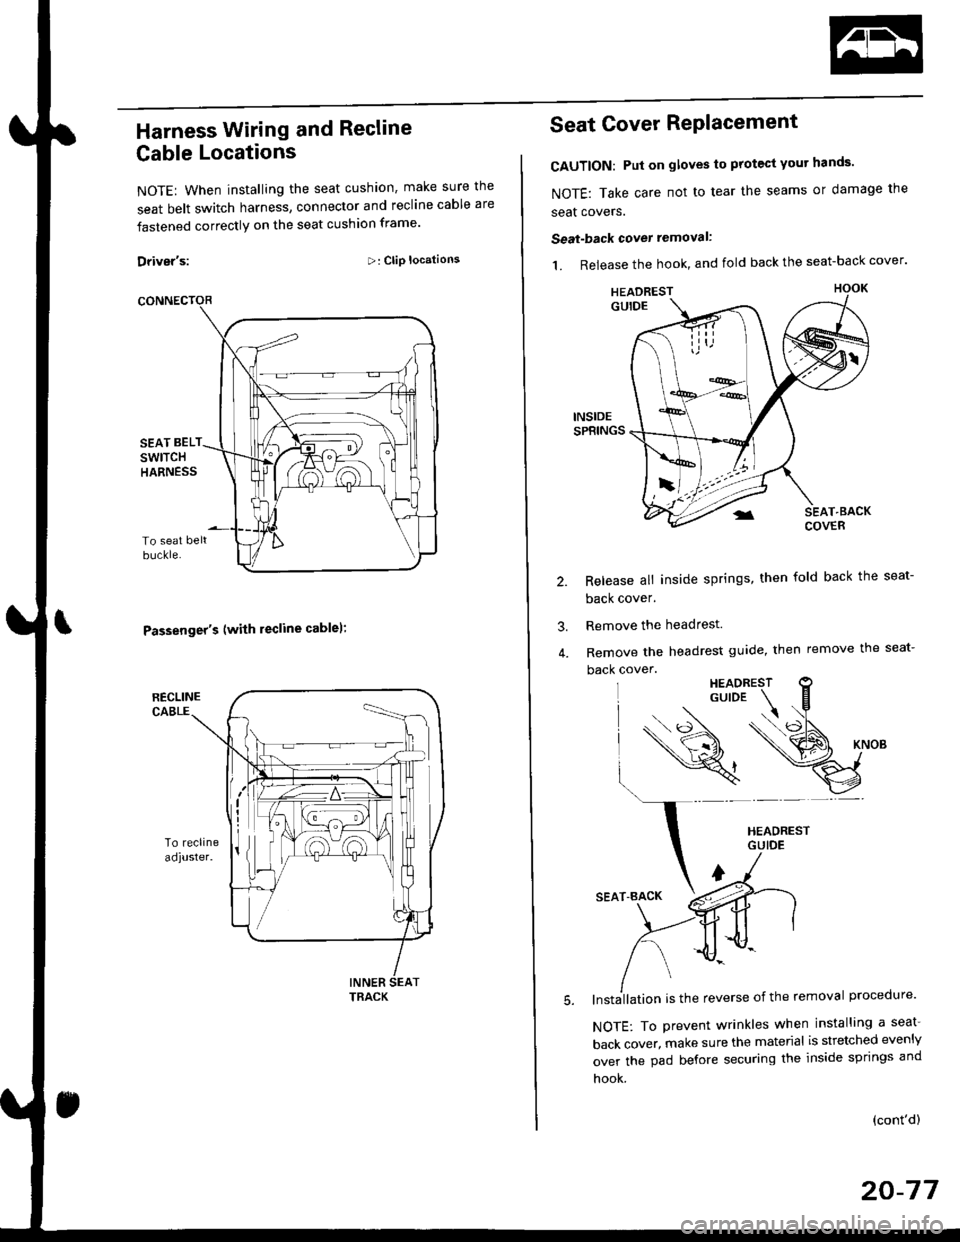 HONDA CIVIC 1997 6.G Workshop Manual Harness Wiring and Recline
Cable Locations
NOTE: When installing the seat cushion, make sure the
seat belt switch harness, connector and recline cable are
fastened correctly on the seat cushion frame